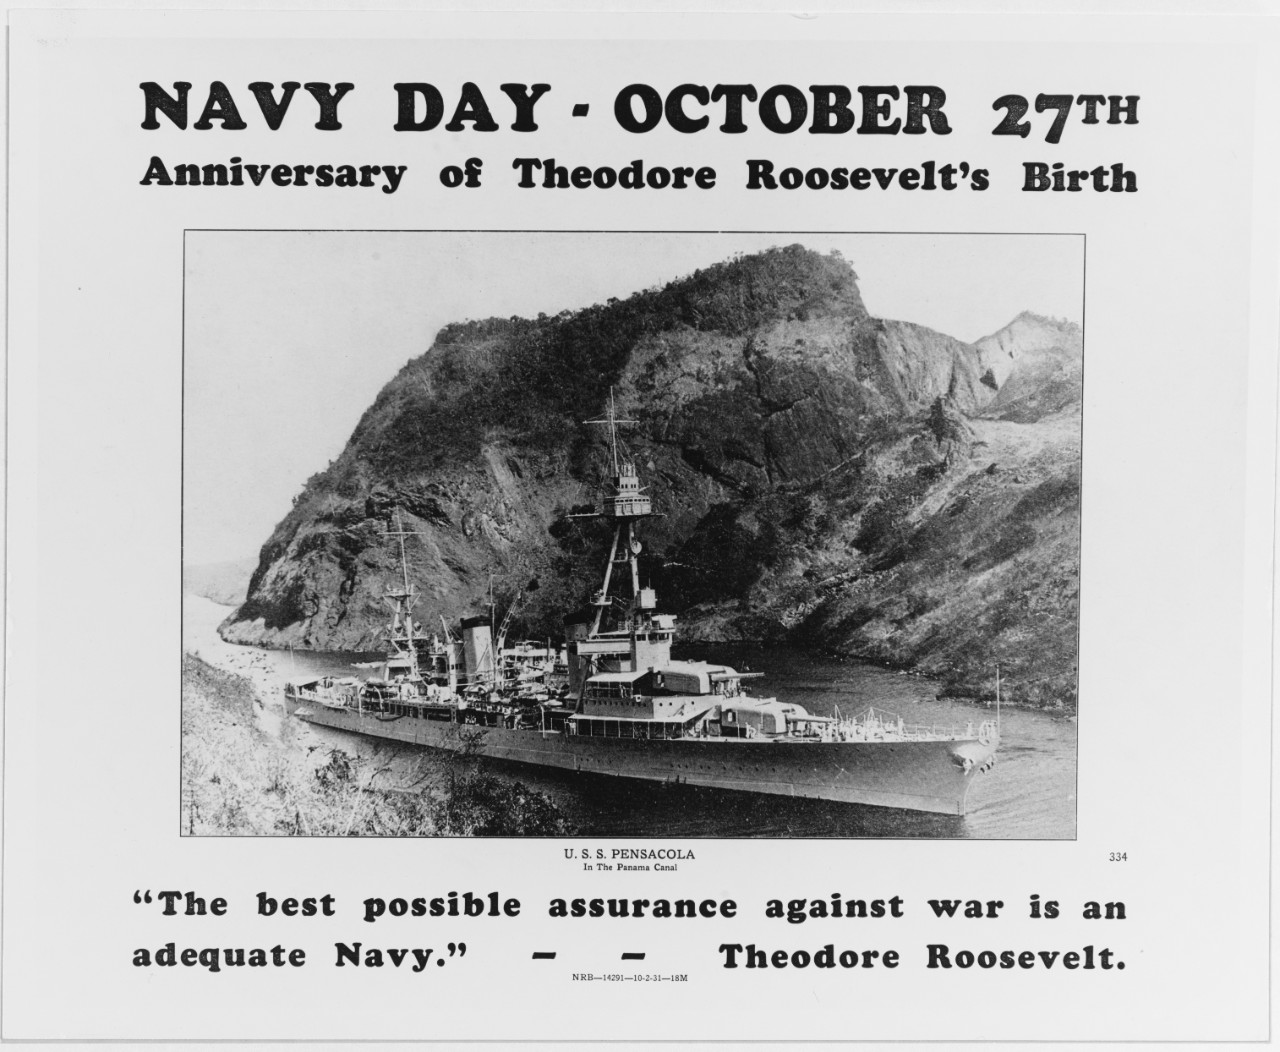 Navy Day poster, 1931